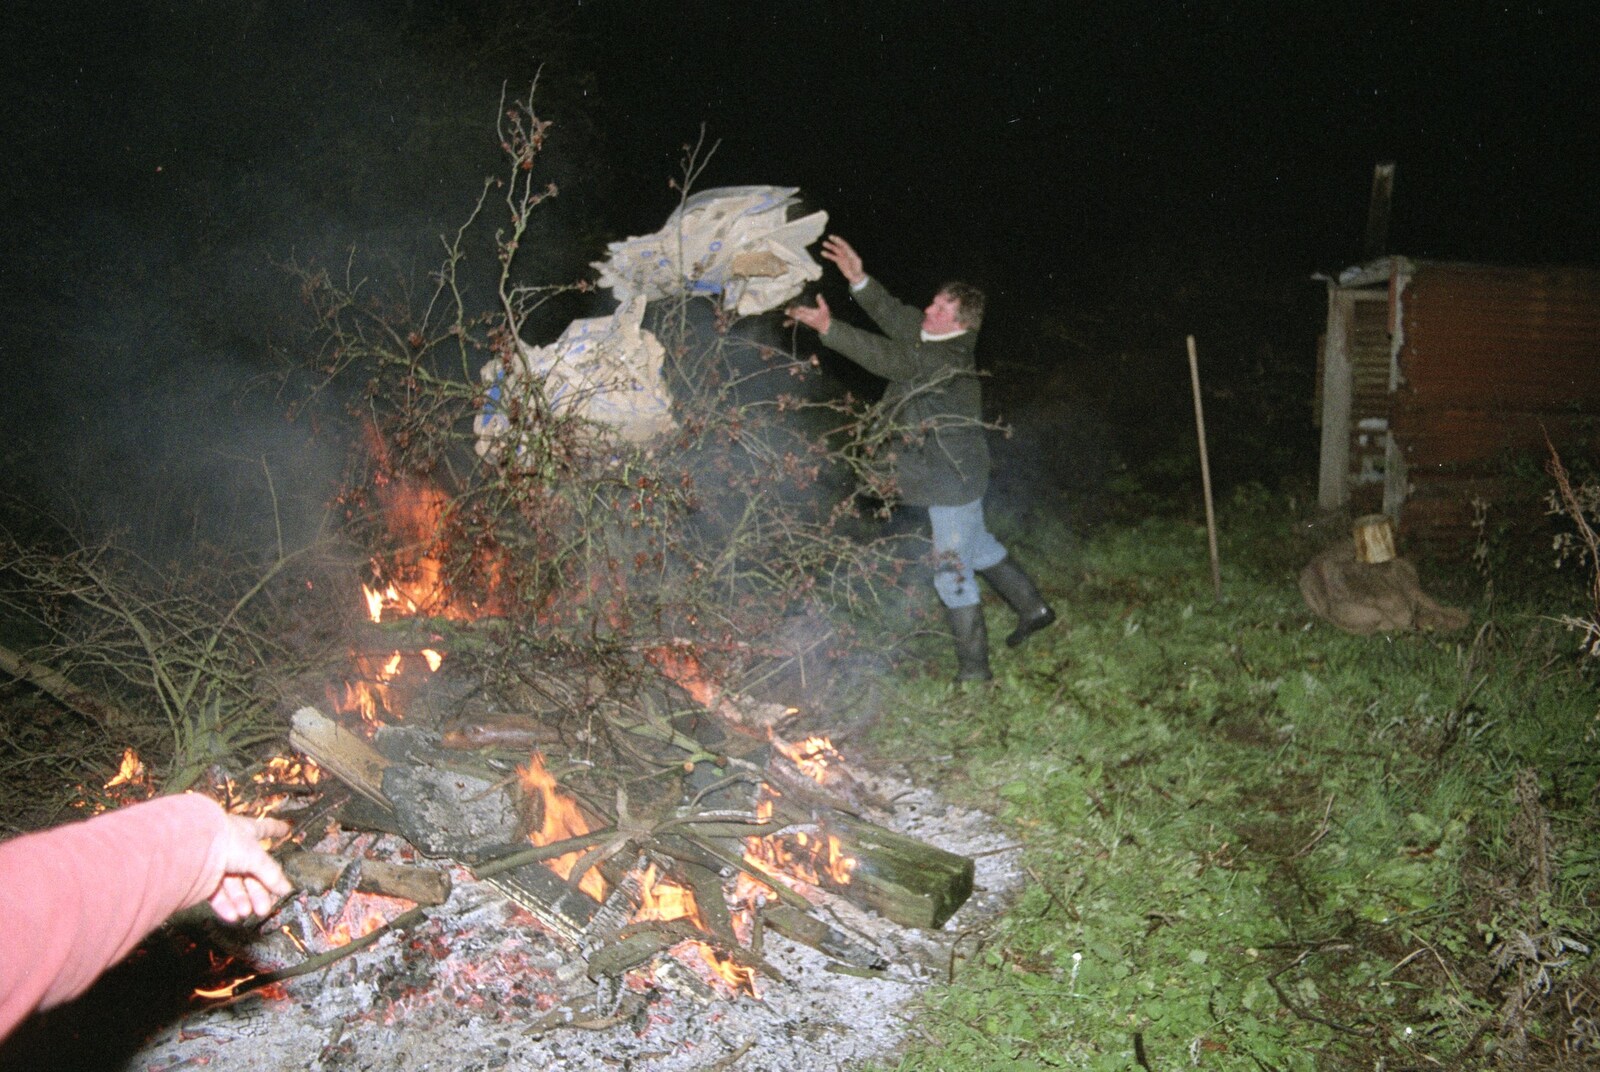 Geoff chucks some more fuel on to the fire from Bonfire Night, Stuston, Suffolk - 5th November 1990